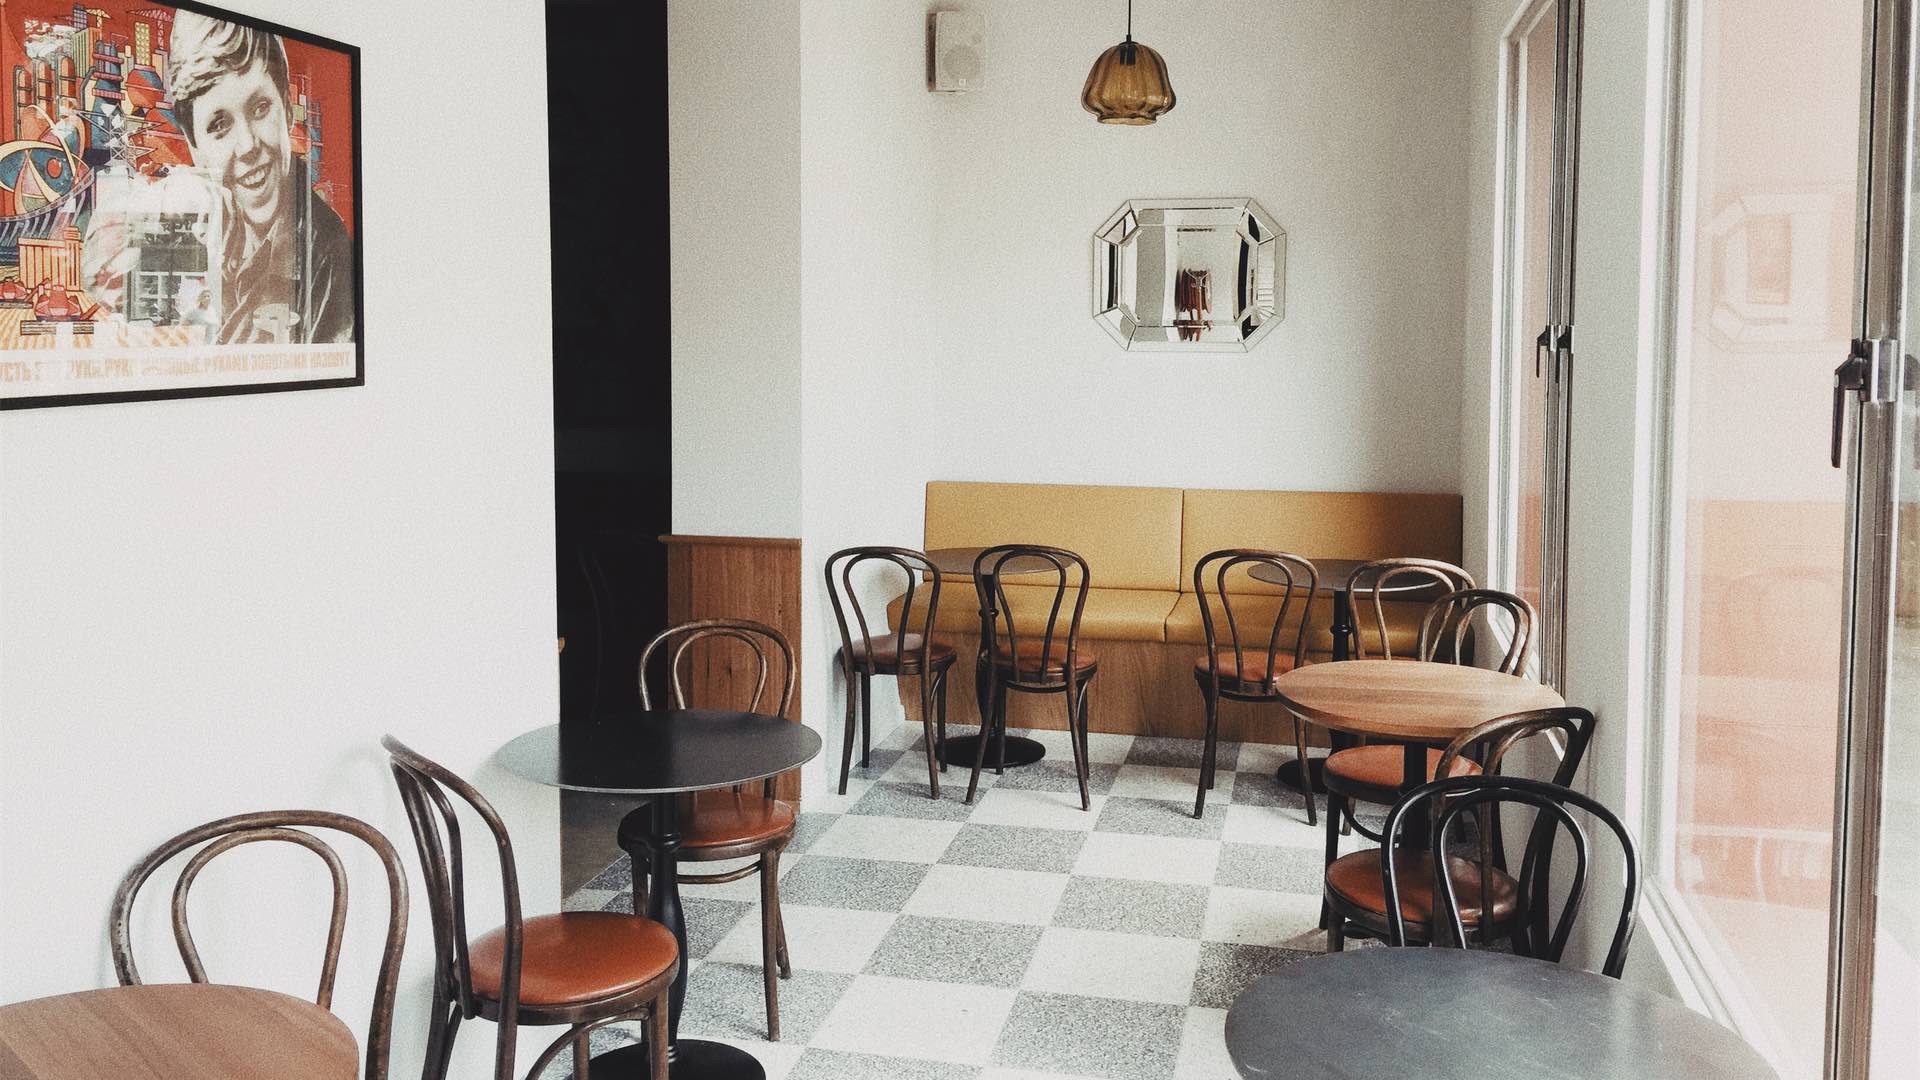 Little Odessa Is Fitzroy's New Eastern European Home of Pierogi and Natural Wine